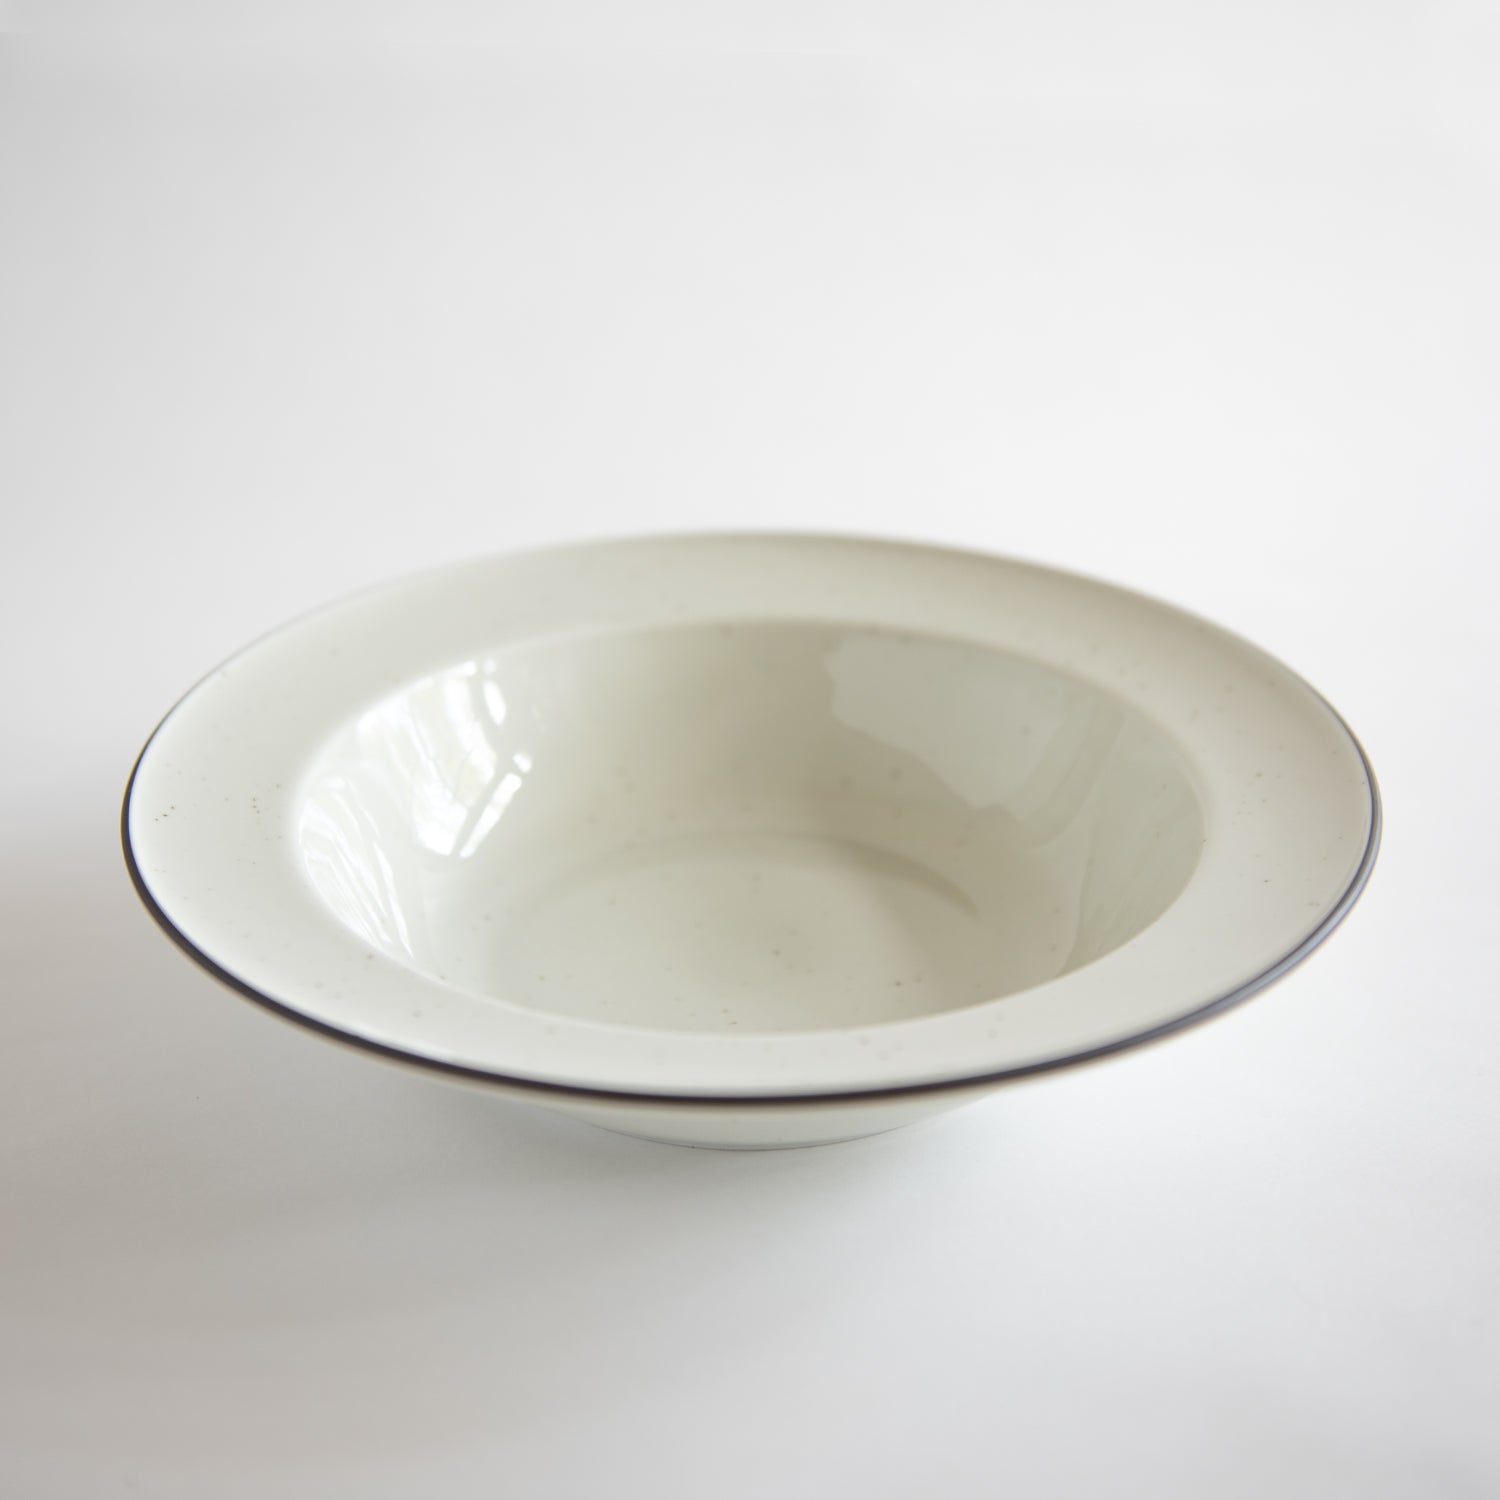 OVANAKER Soup Plate Brown